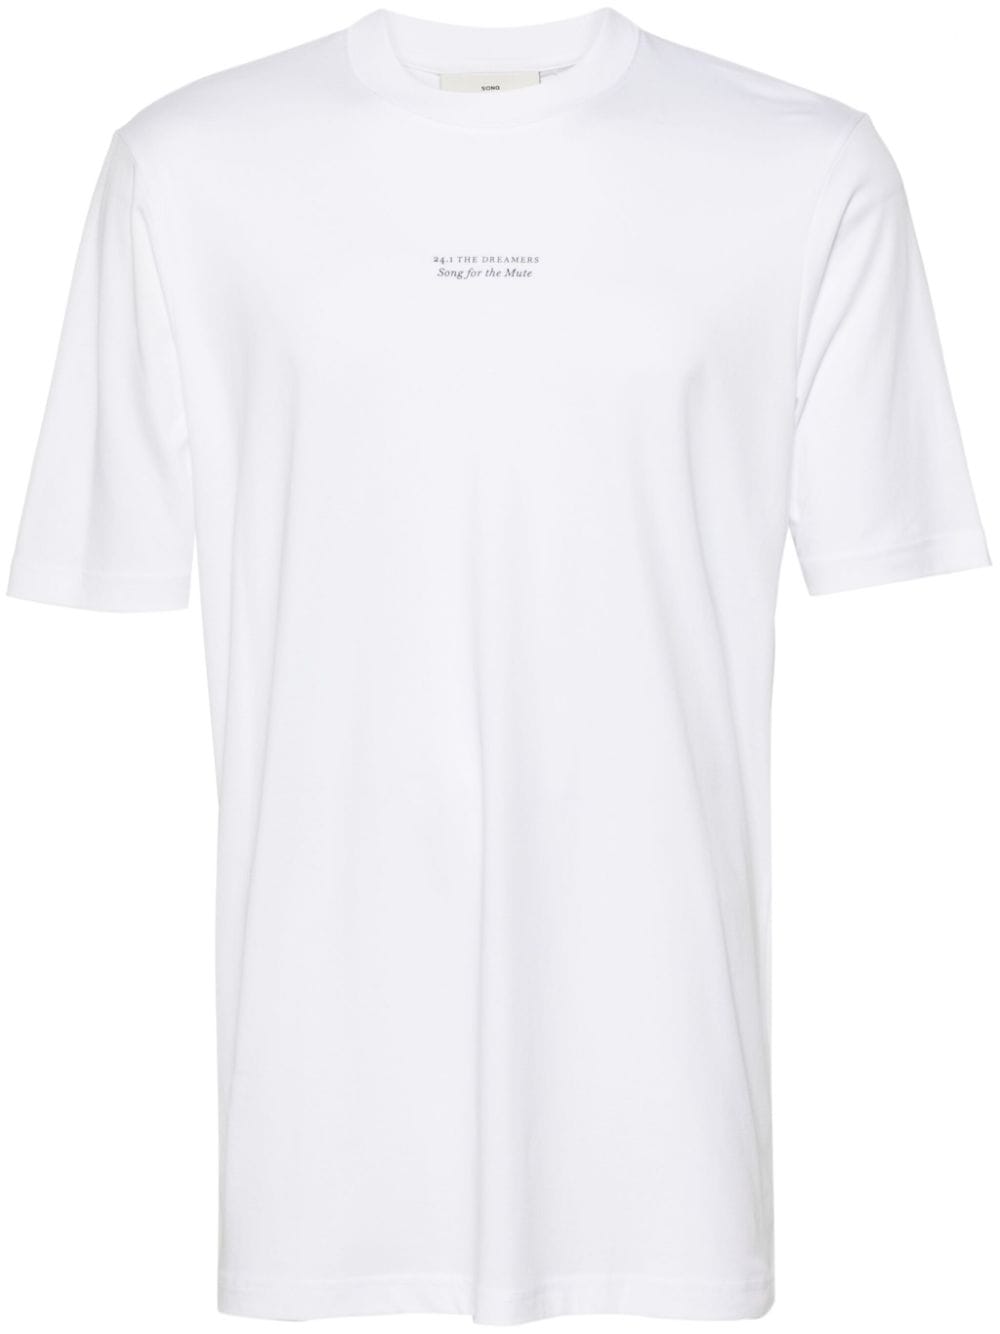 Song For The Mute The Dreamers cotton T-shirt - White von Song For The Mute